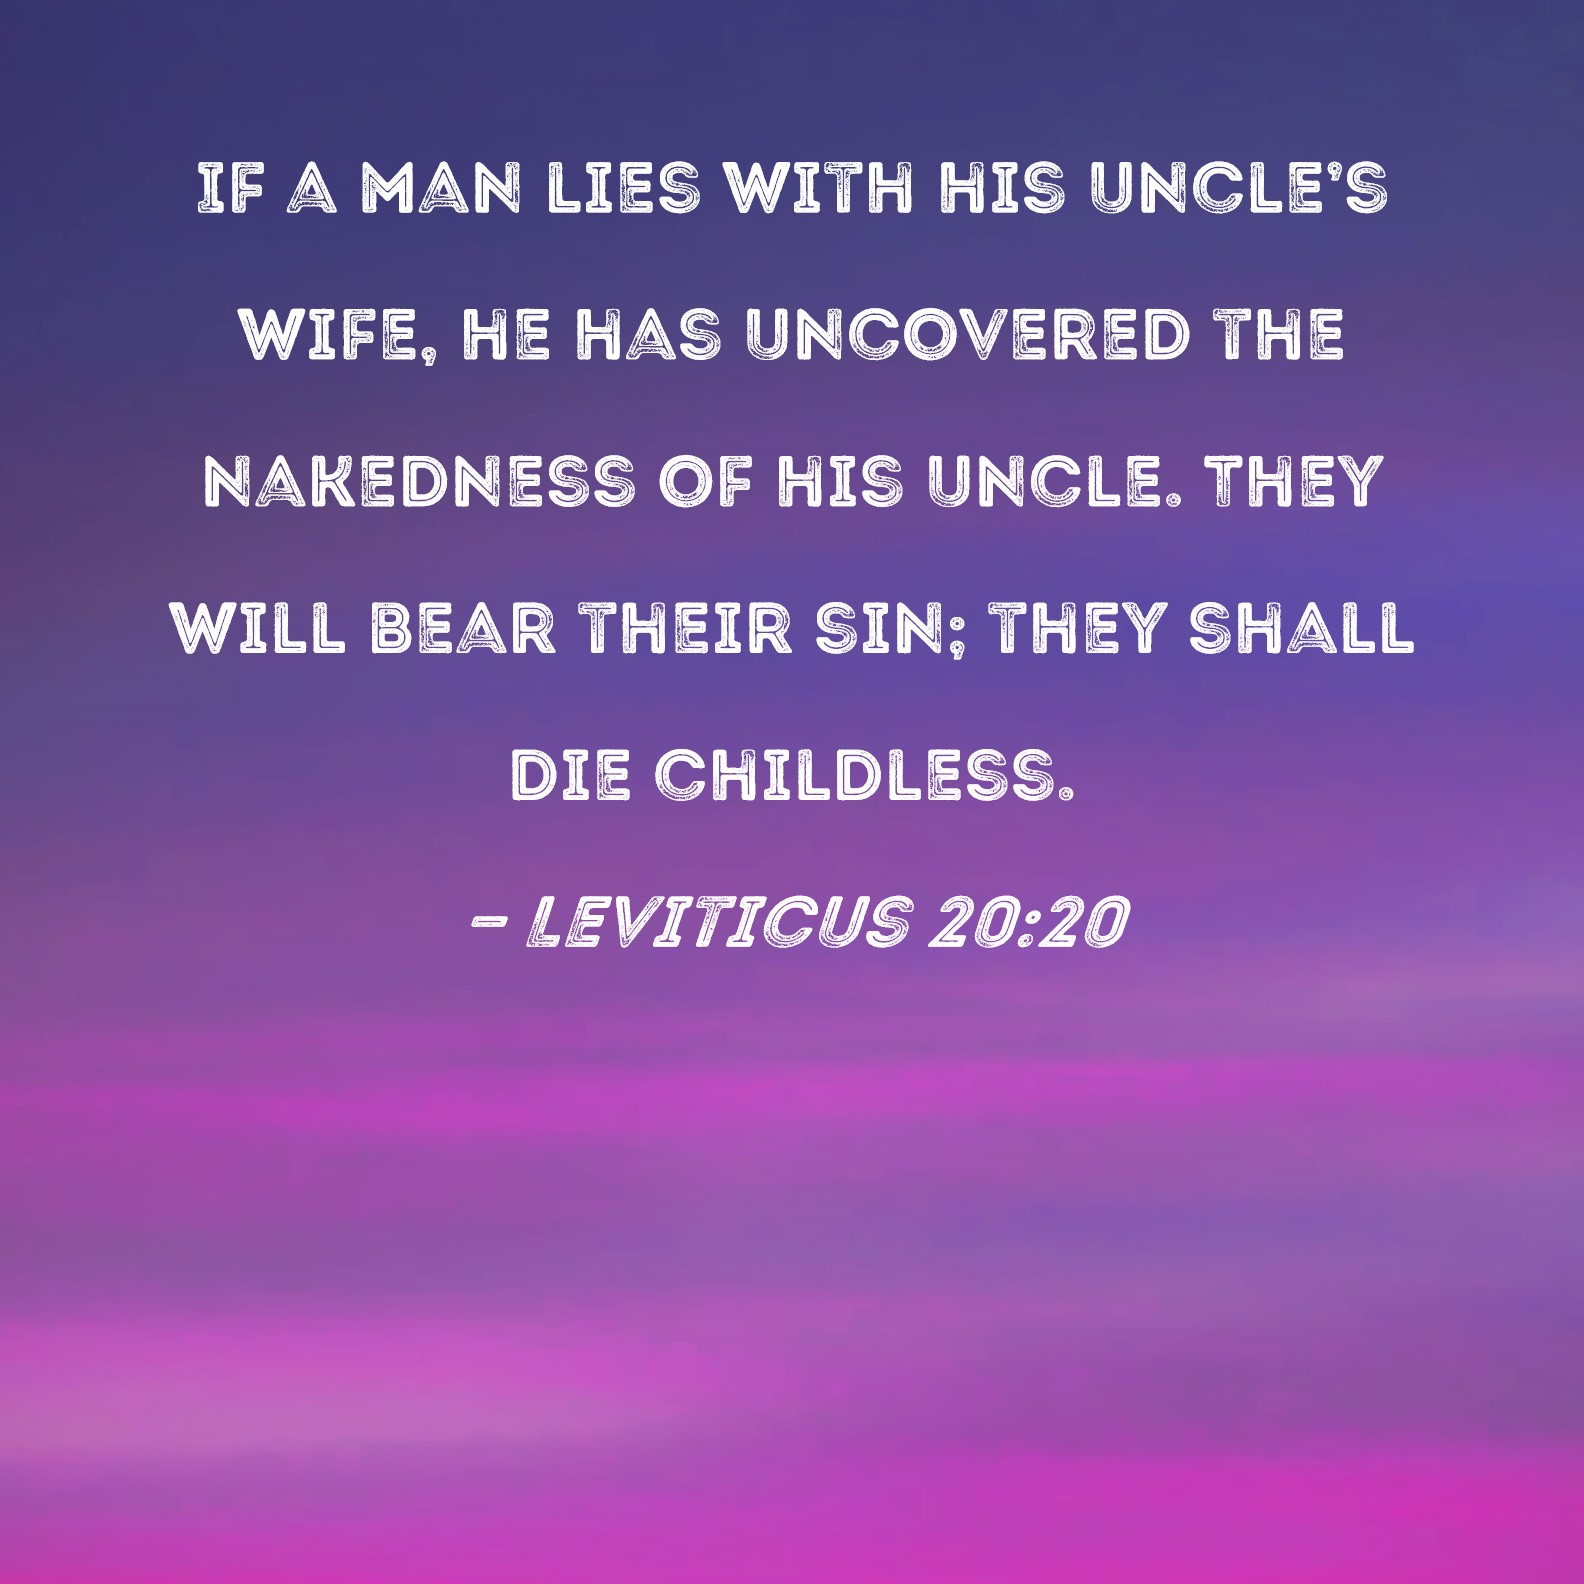 Leviticus 2020 If a man lies with his uncles wife, he has uncovered the nakedness of his uncle picture